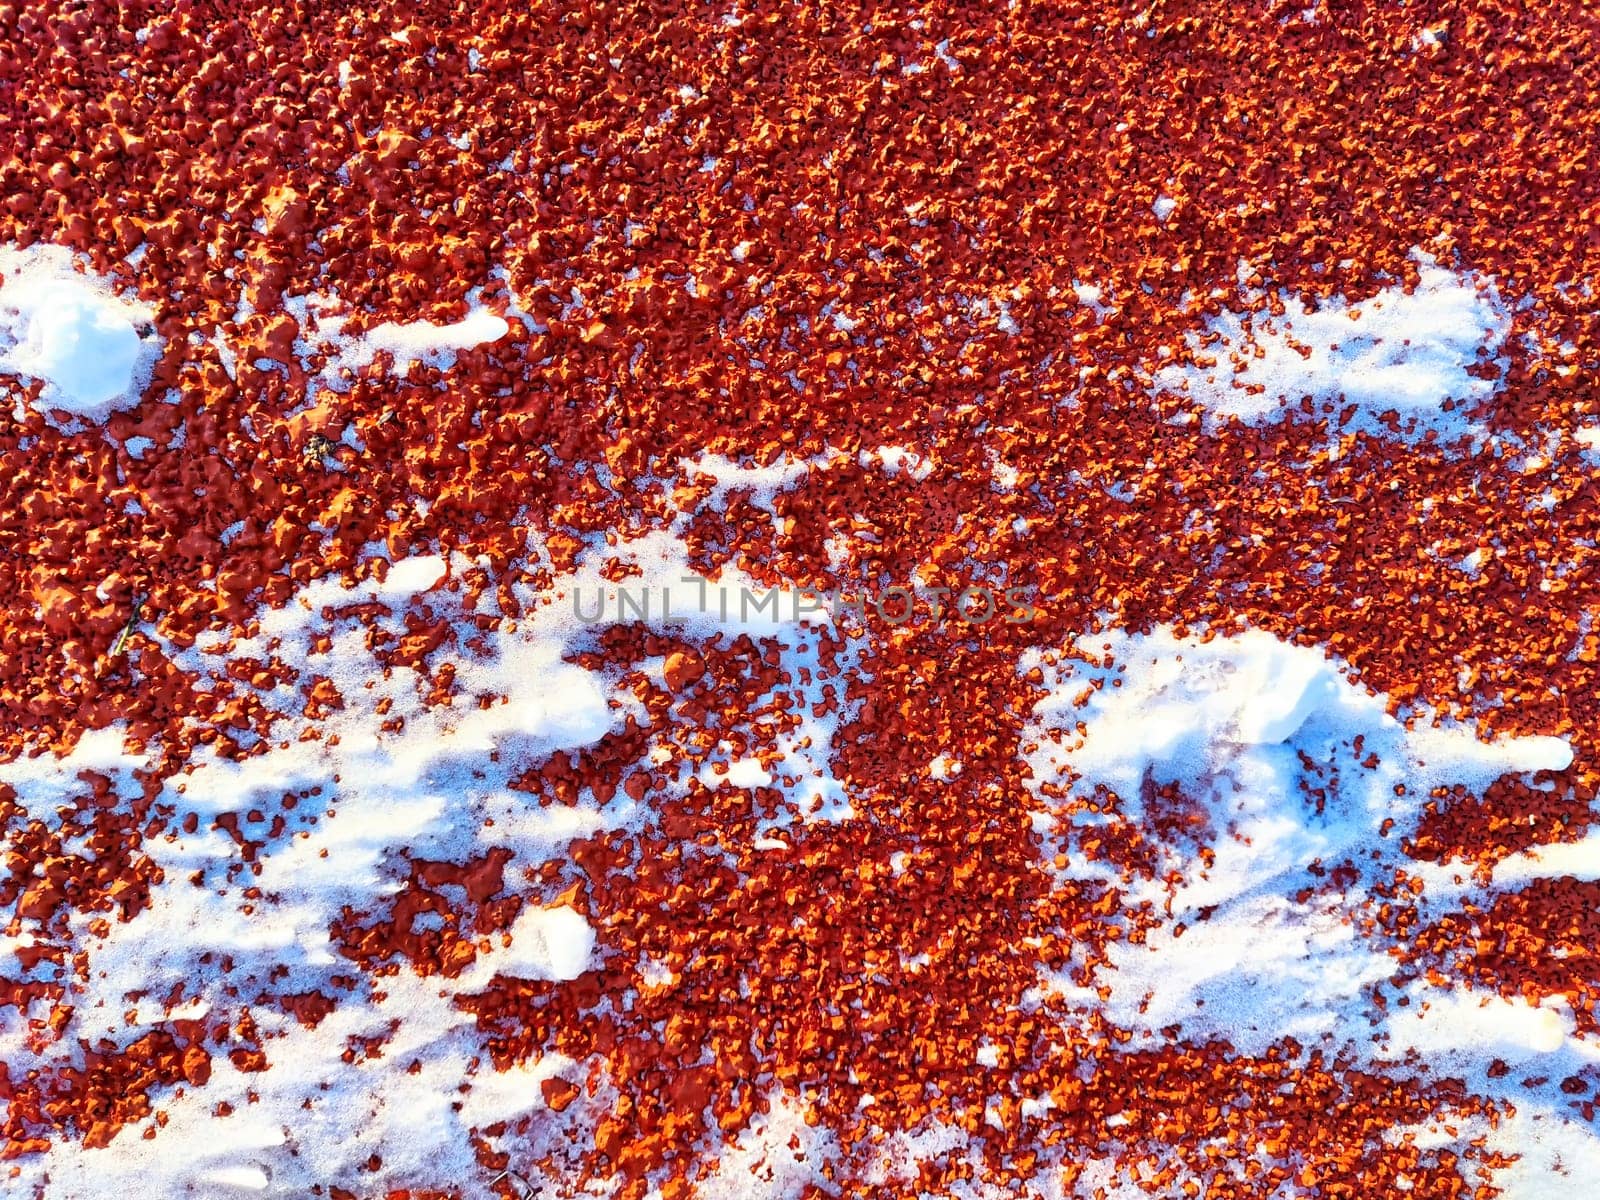 Red pebbles or rubberized textured material and white snow on it. Background, texture, frame, copy space. Contrast of red pebbles and white snow creating textured backdrop